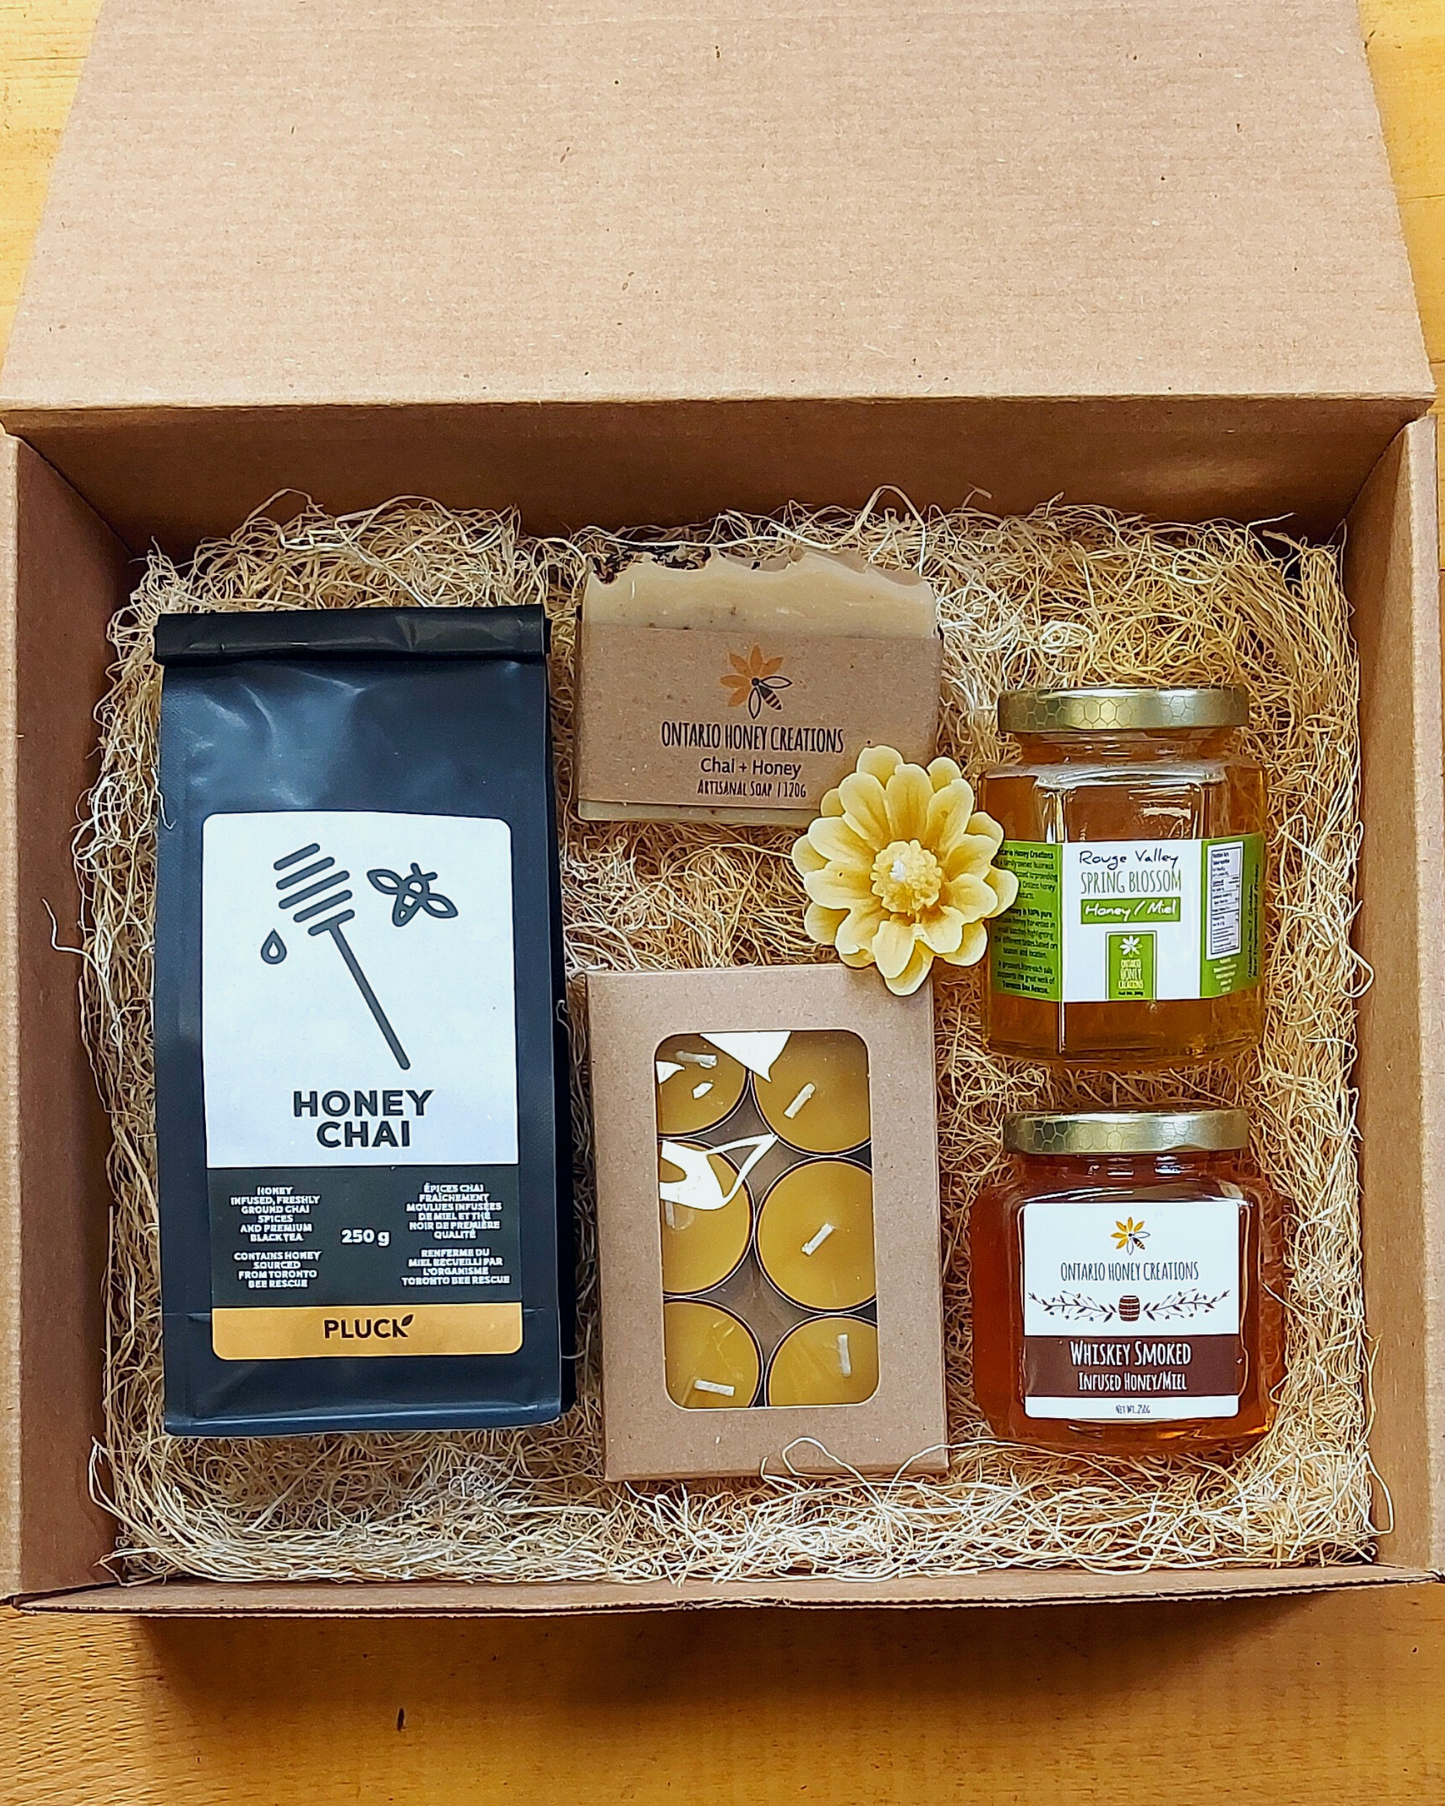 Load image into Gallery viewer, Gift box with Honey Chai Tea, Beeswax Tealight Candles, Chai Honey Soap, Whiskey Smoked Honey, and Rouge Valley Spring Honey
